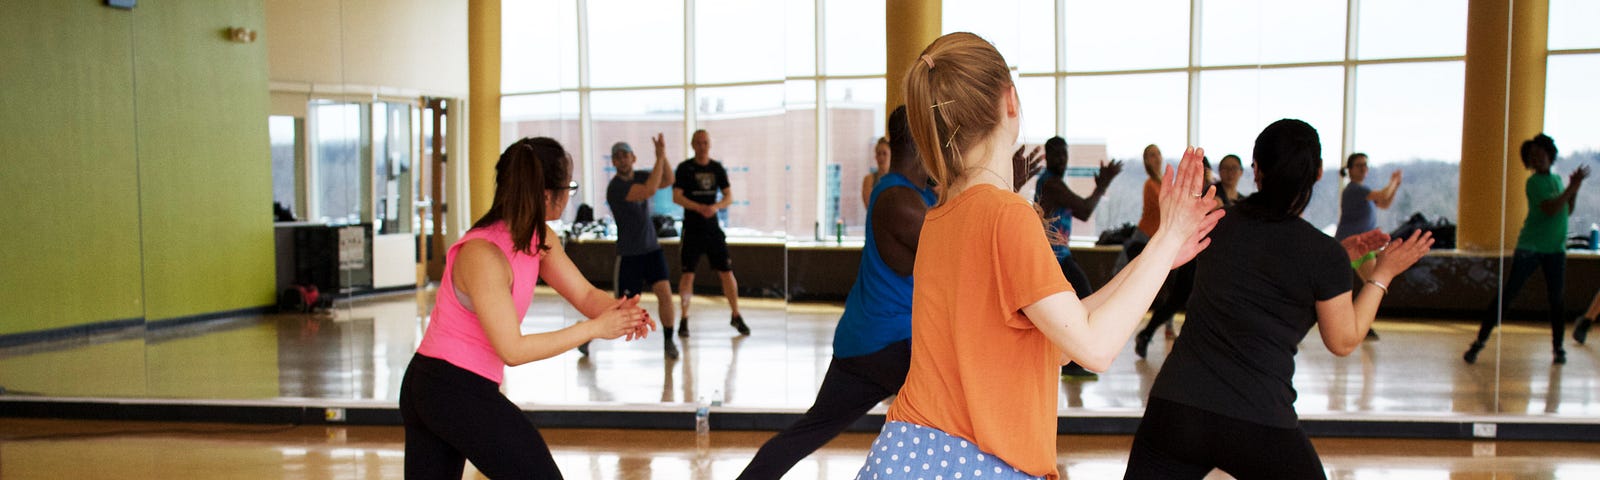 People are taking a dance class in which a mirror lines the front wall of the room. #dance #danceclass #zumba #dancers